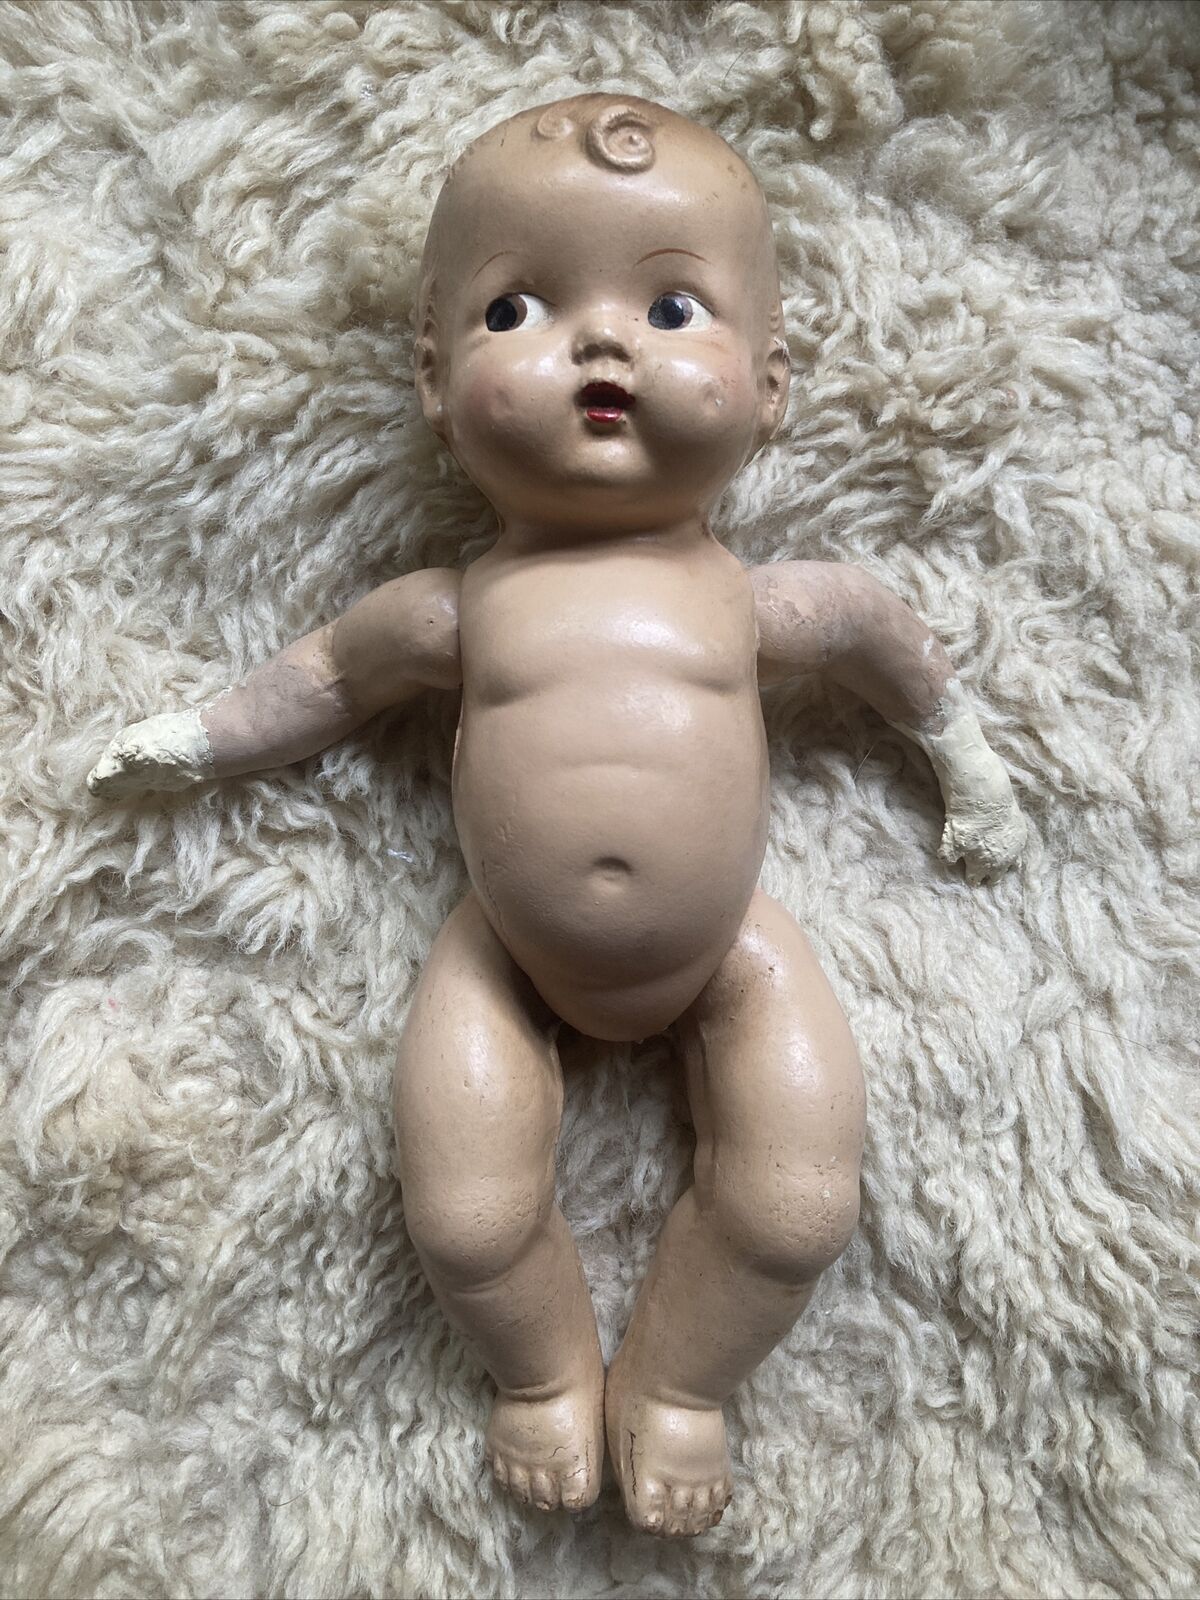 Antique Composition Baby Doll 11" Tall Strung Arms Legs Head Vintage Unsigned